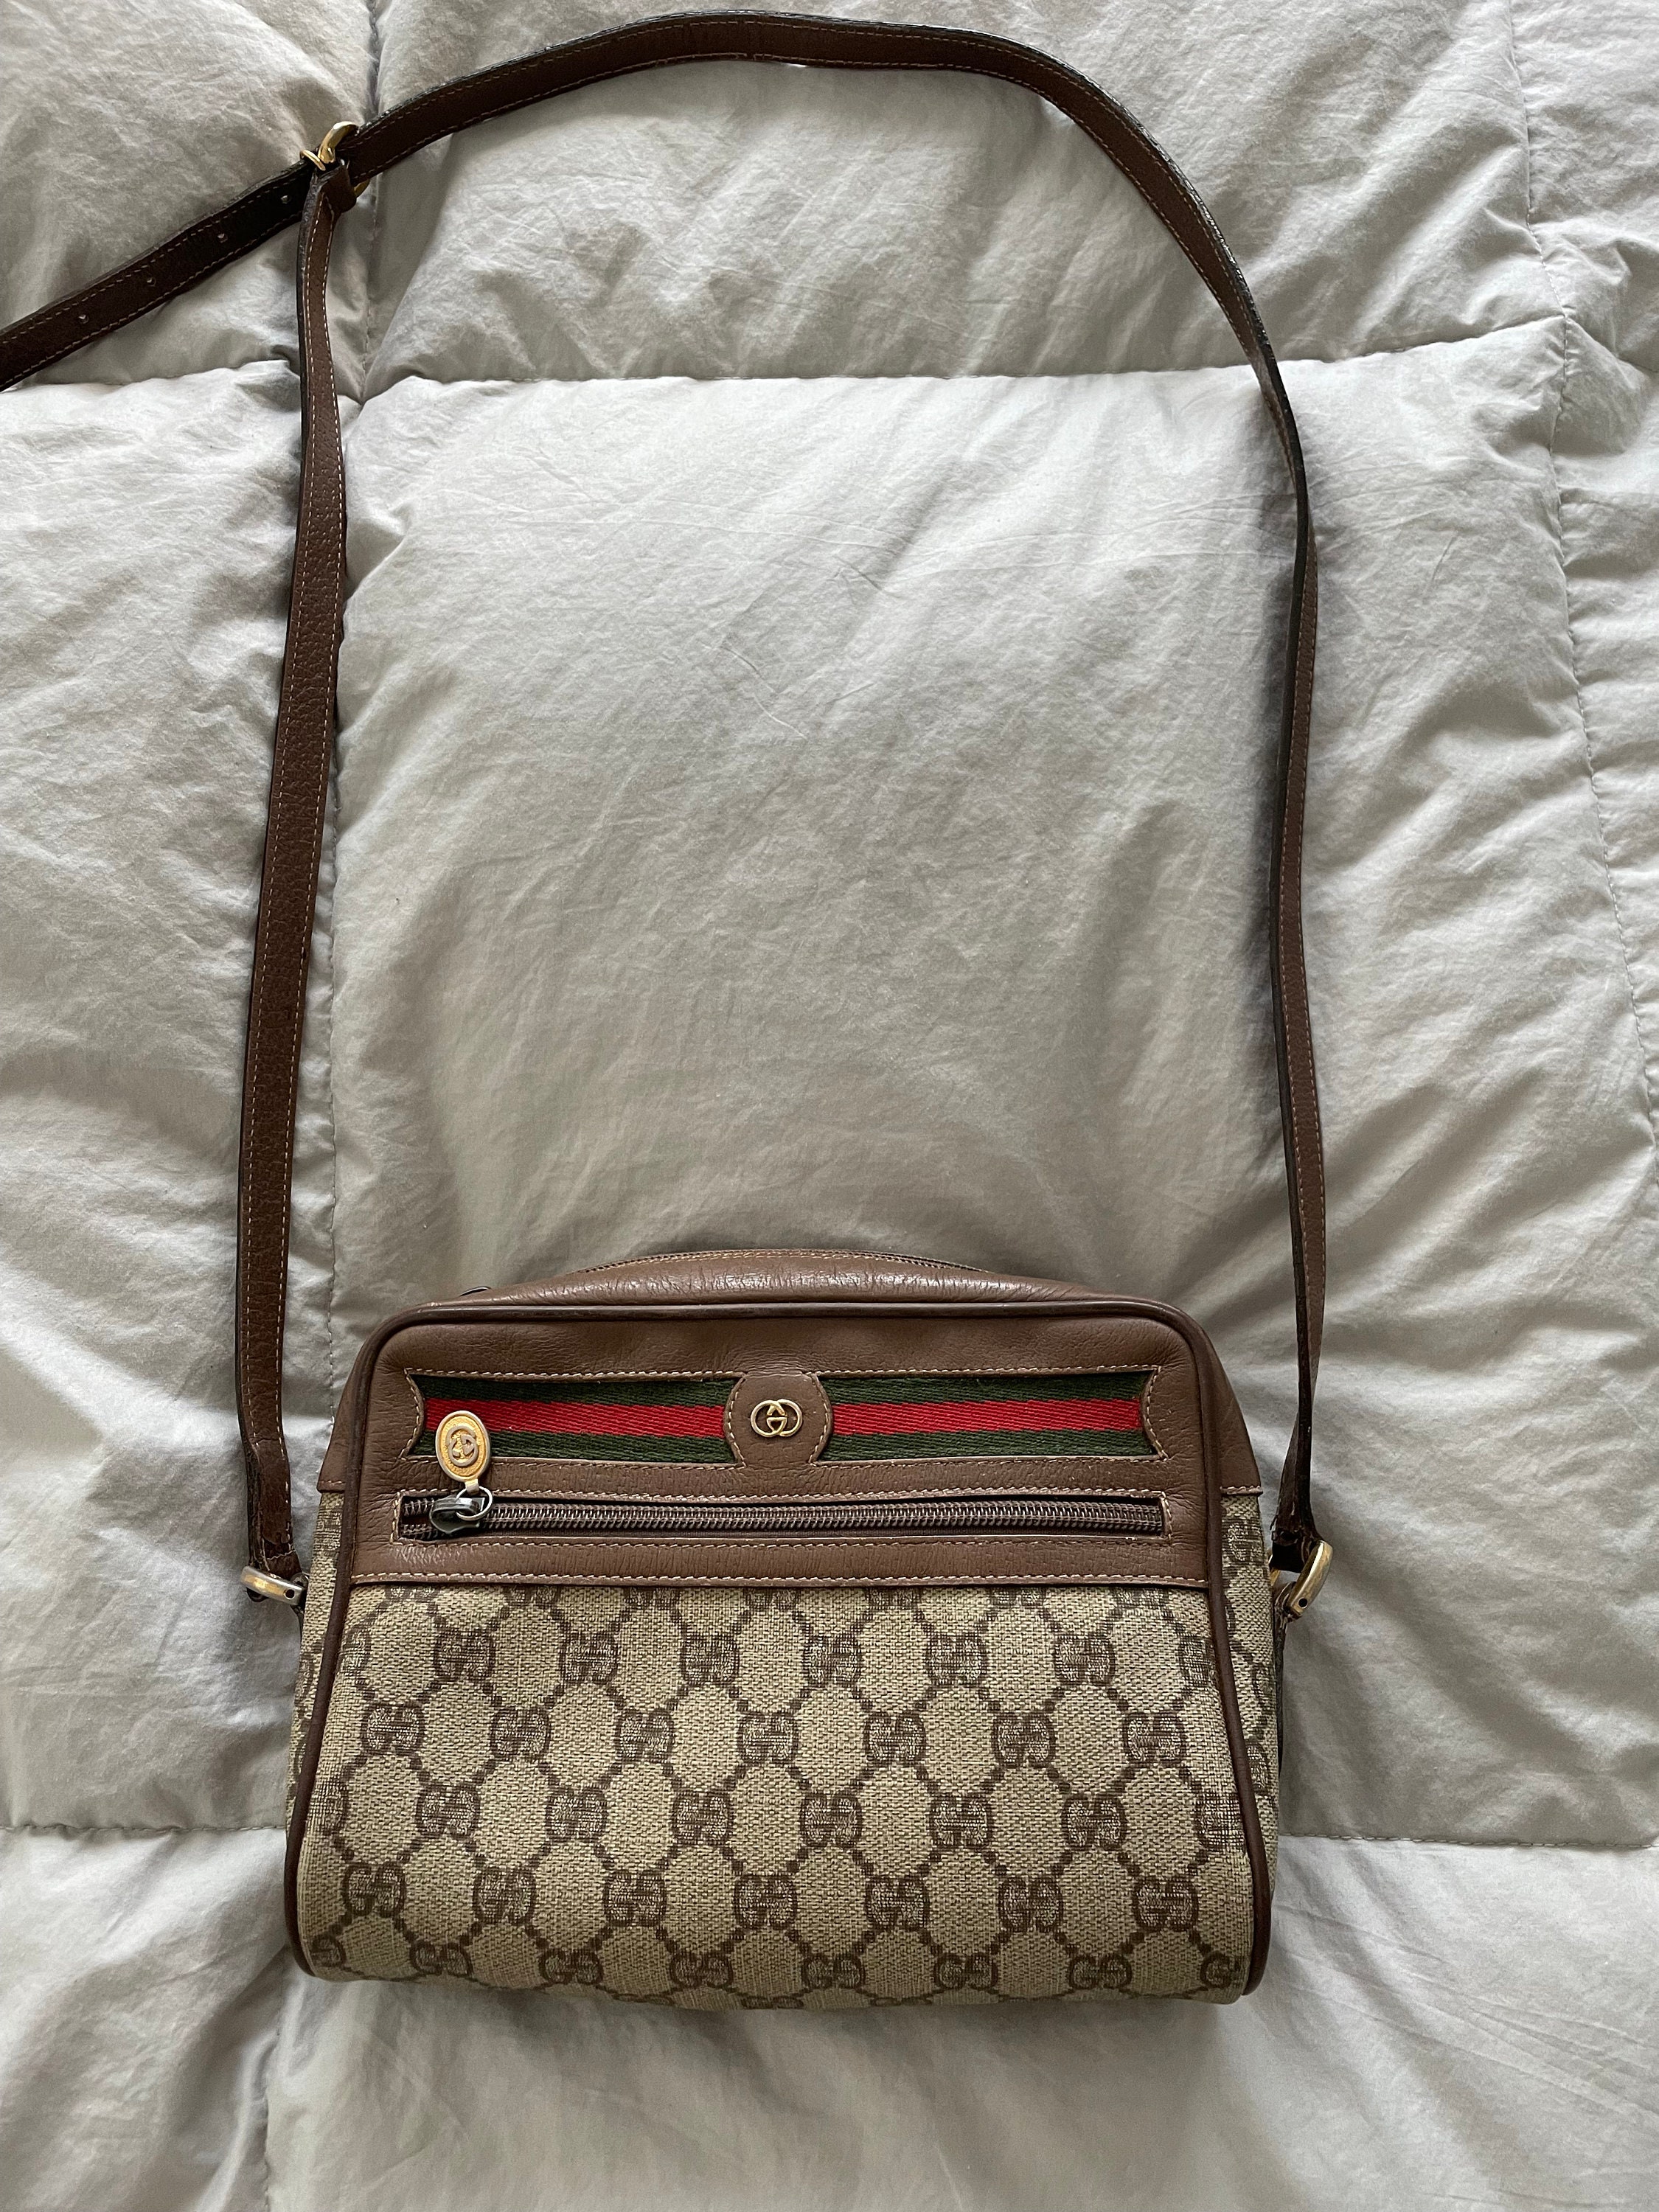 Gucci sling bag Price 320 - Evelyn Accessories Online Shop